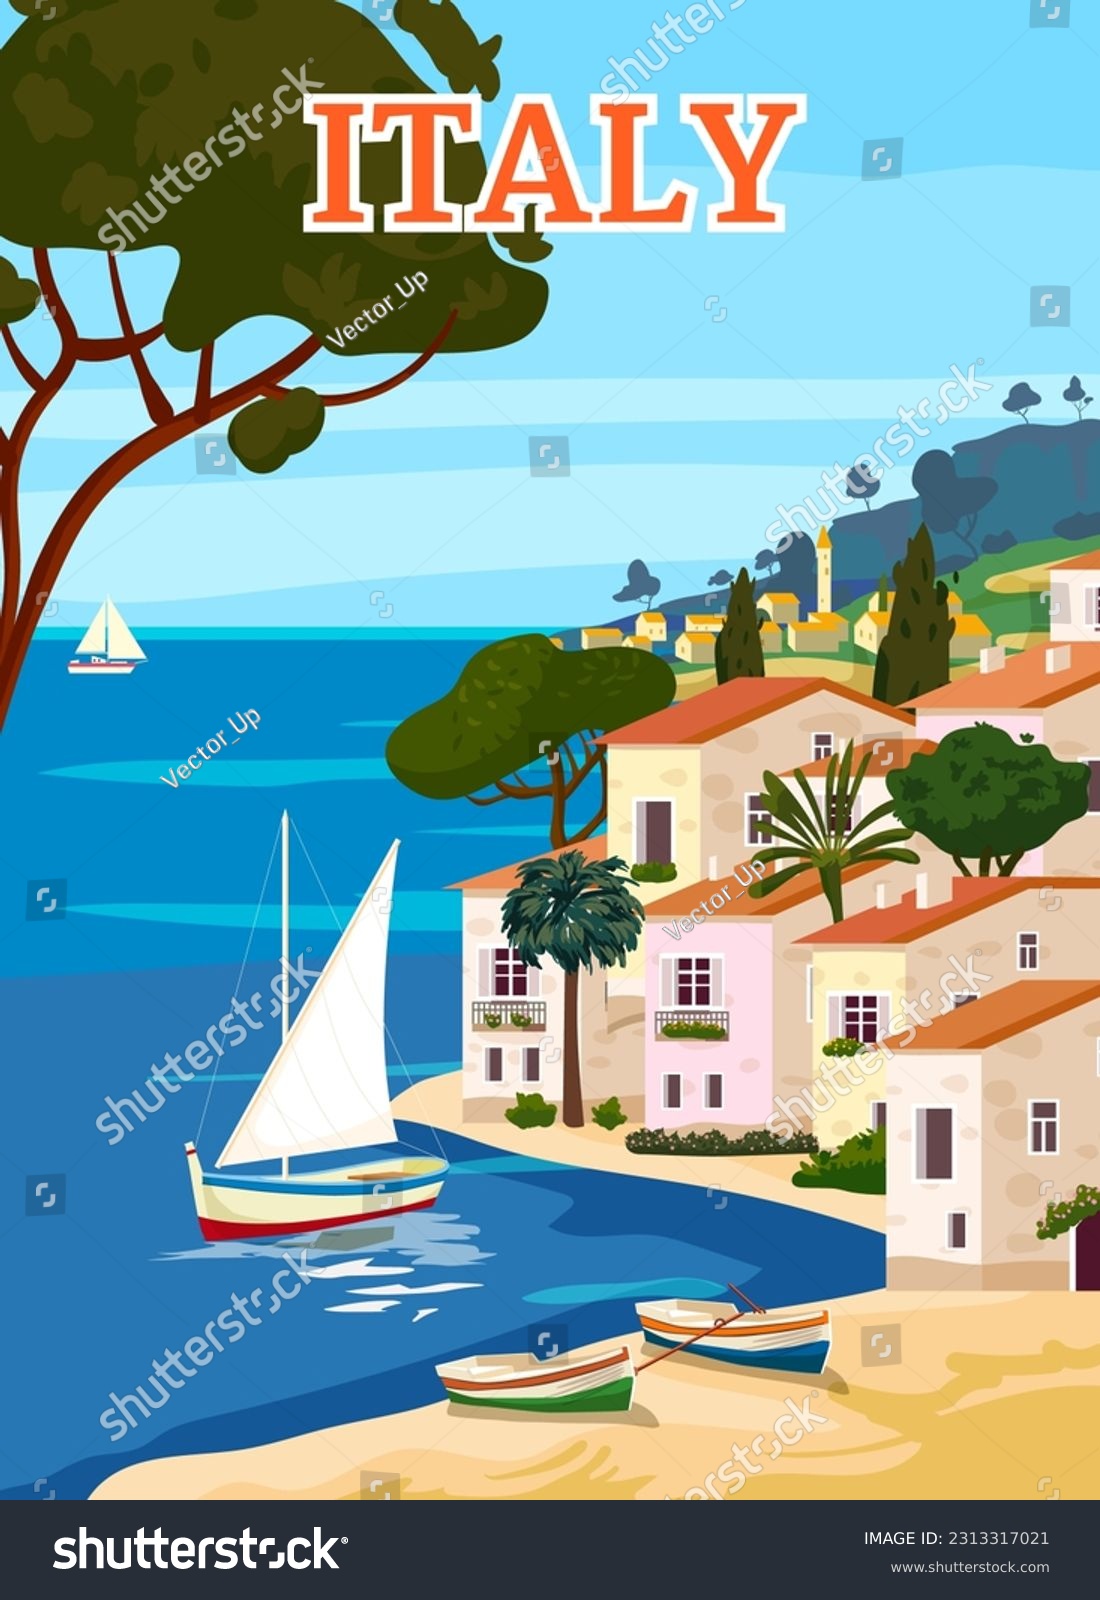 SVG of Italy Travel Poster, mediterranean romantic landscape, mountains, seaside town, sailboat, sea. Retro poster svg